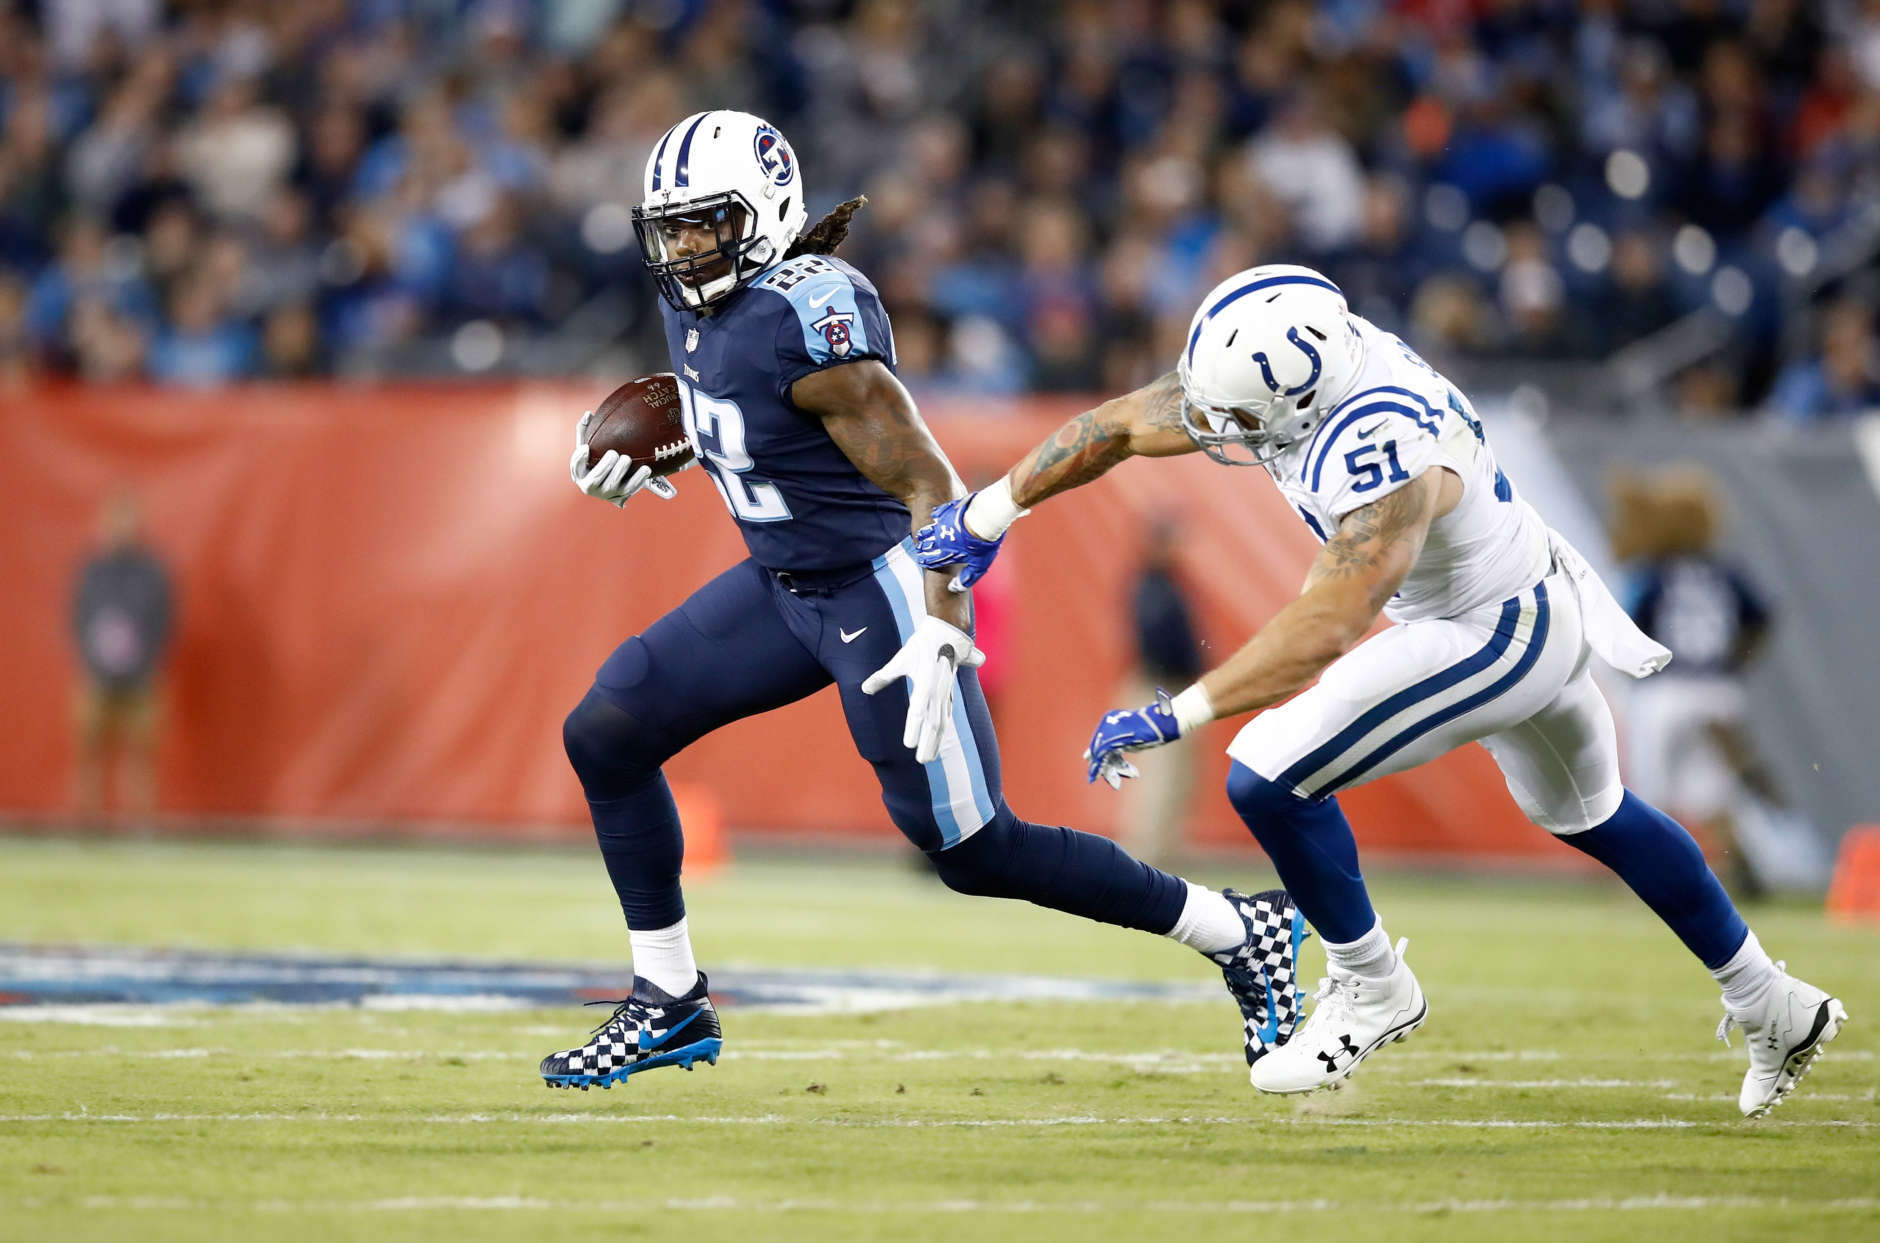 NASHVILLE, TN - OCTOBER 16:  Derrick Henry #22 of the Tennessee Titans runs with the ball against the  Indianapolis Colts at Nissan Stadium on October 16, 2017 in Nashville, Tennessee.  (Photo by Andy Lyons/Getty Images)